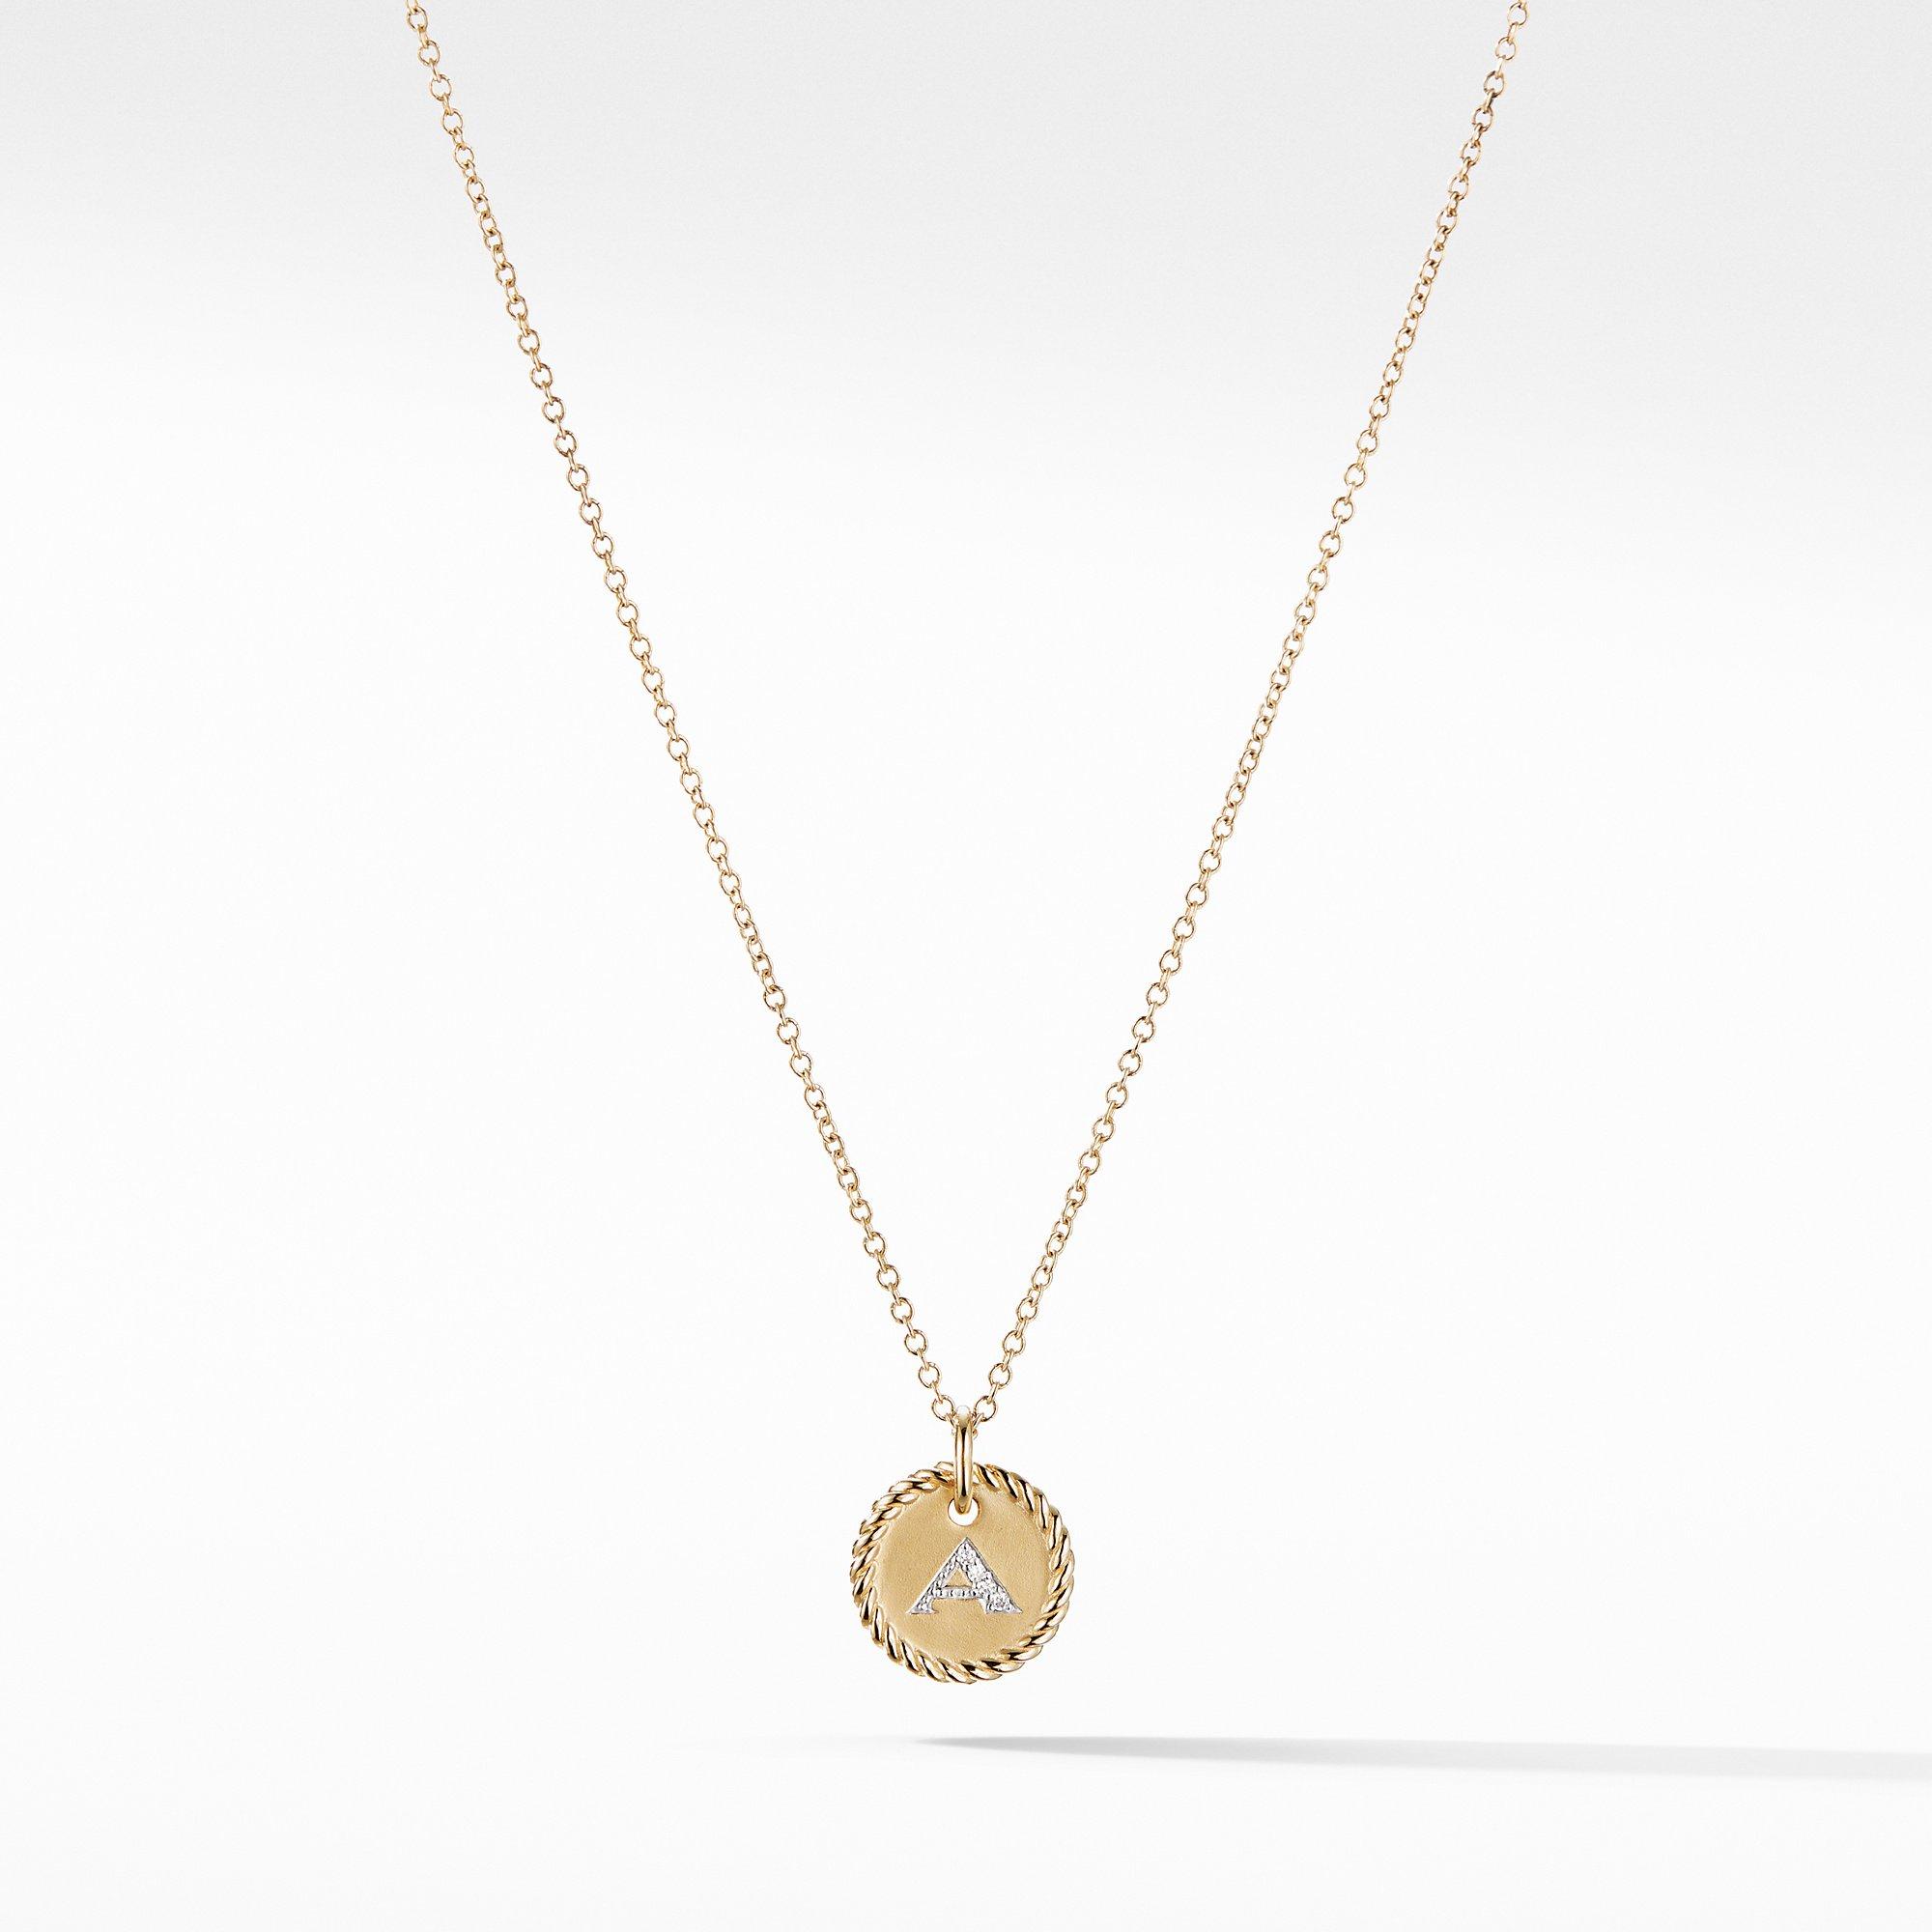 David Yurman A Initial Charm Necklace in 18k Yellow Gold with Diamonds